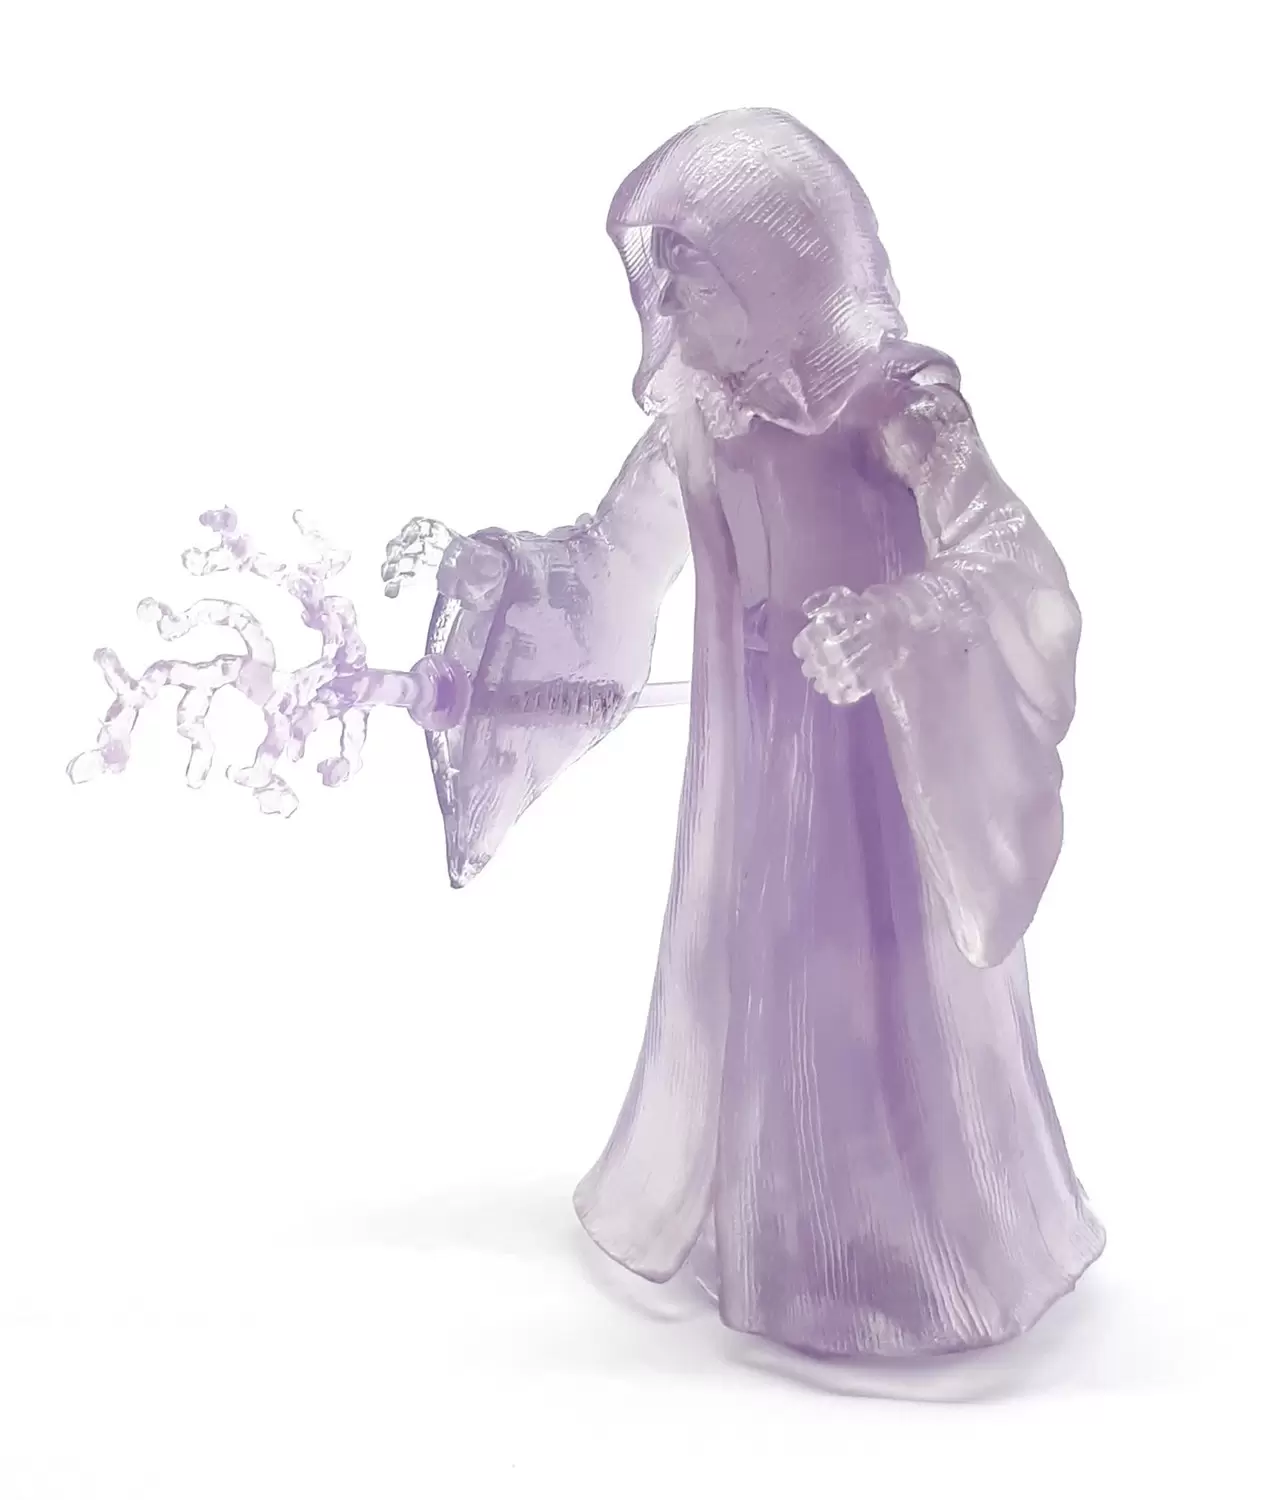 Revenge of the Sith - Emperor Palpatine (Holographic)